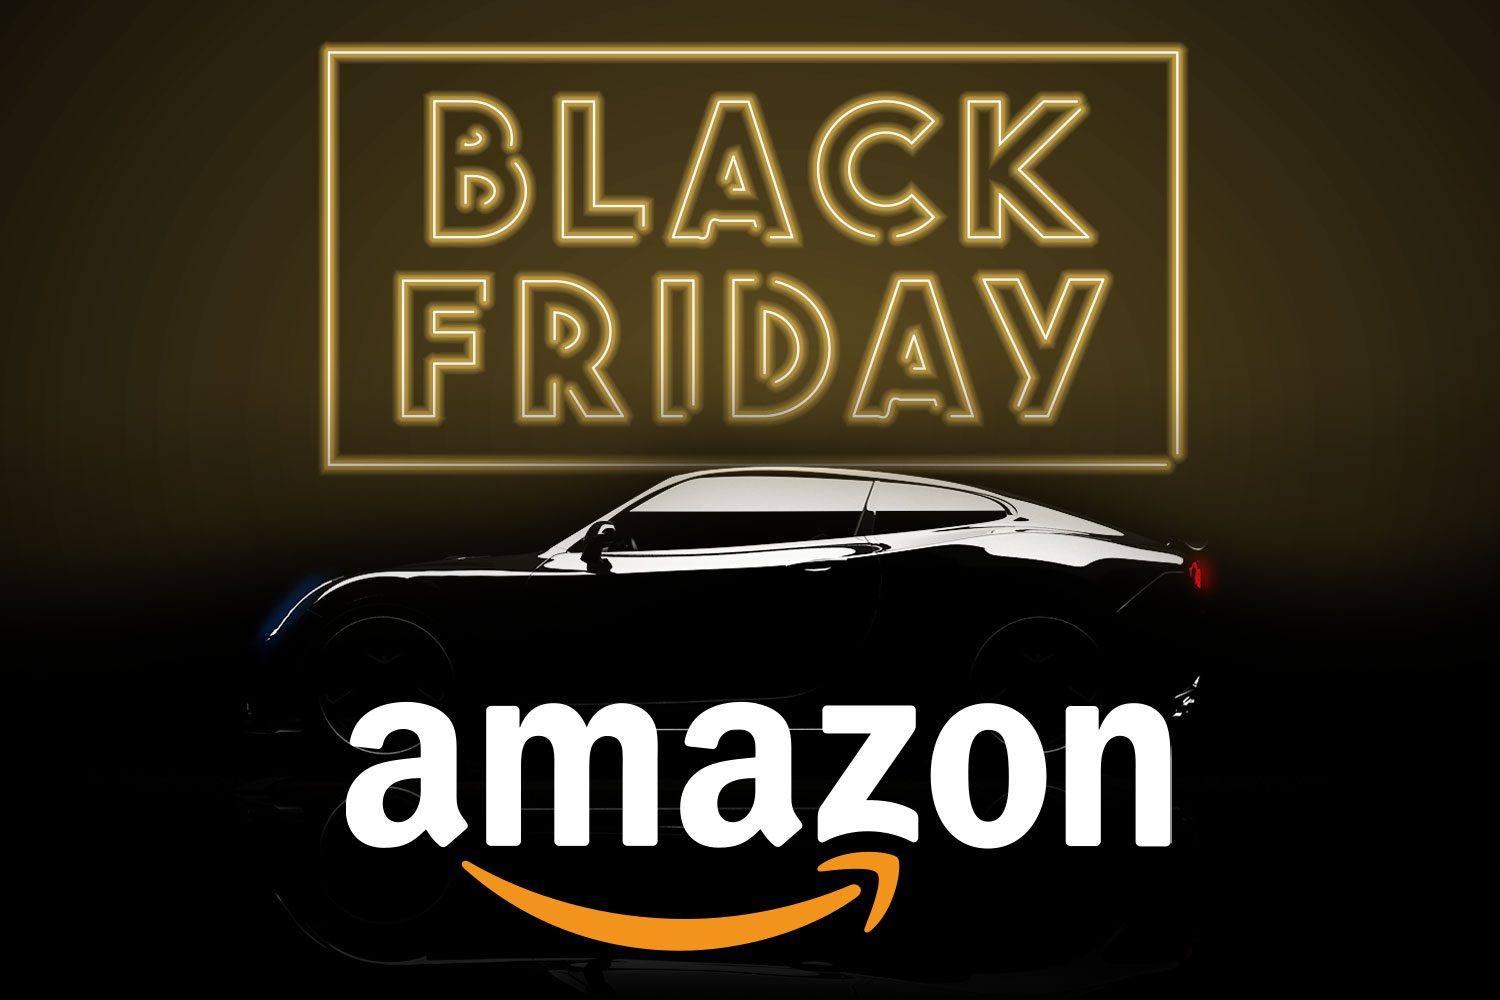 Amazon Black Friday deals for cars